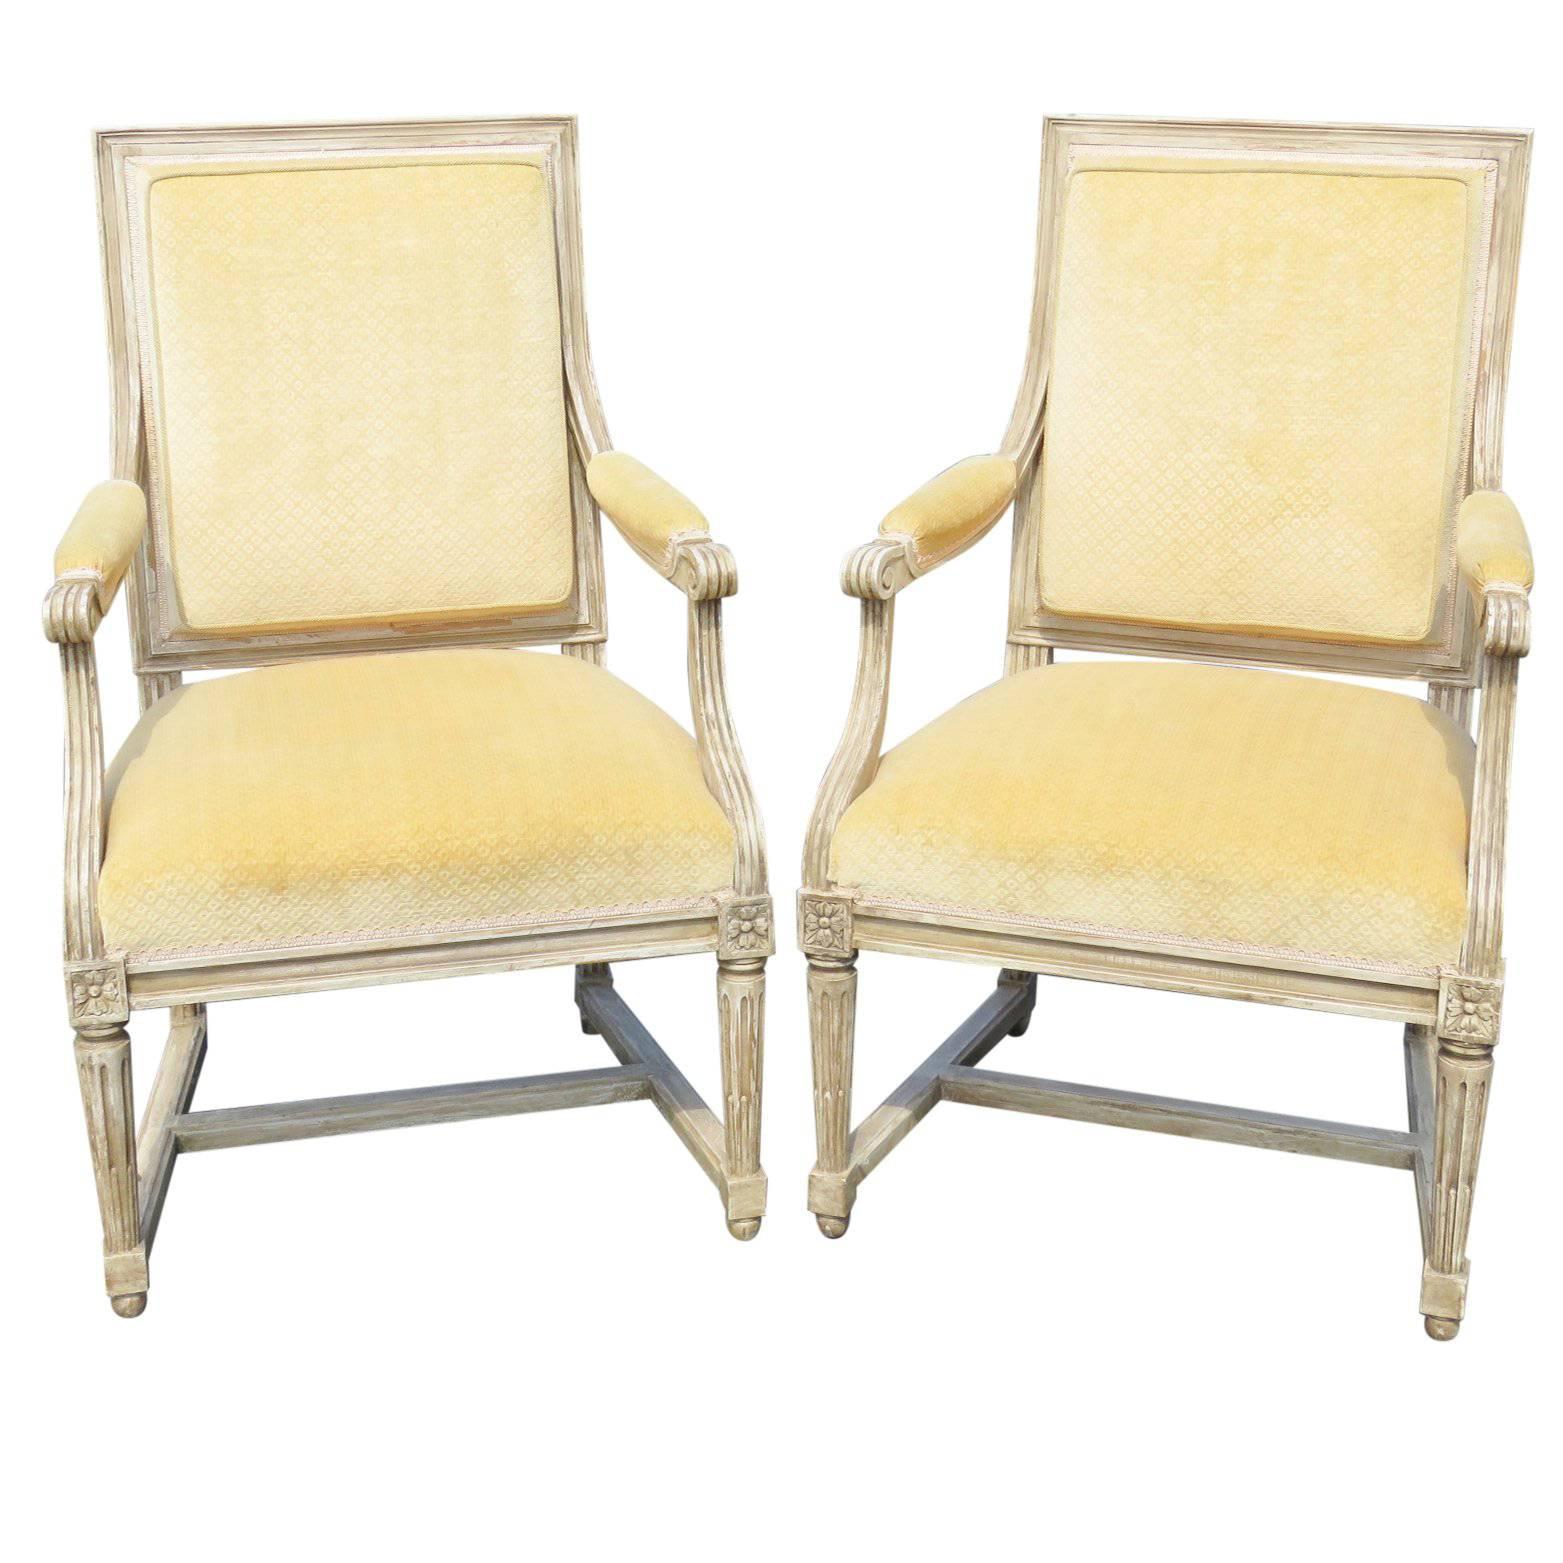 Pair of Louis XVI Style Distressed Painted Fauteuils Arm Chairs